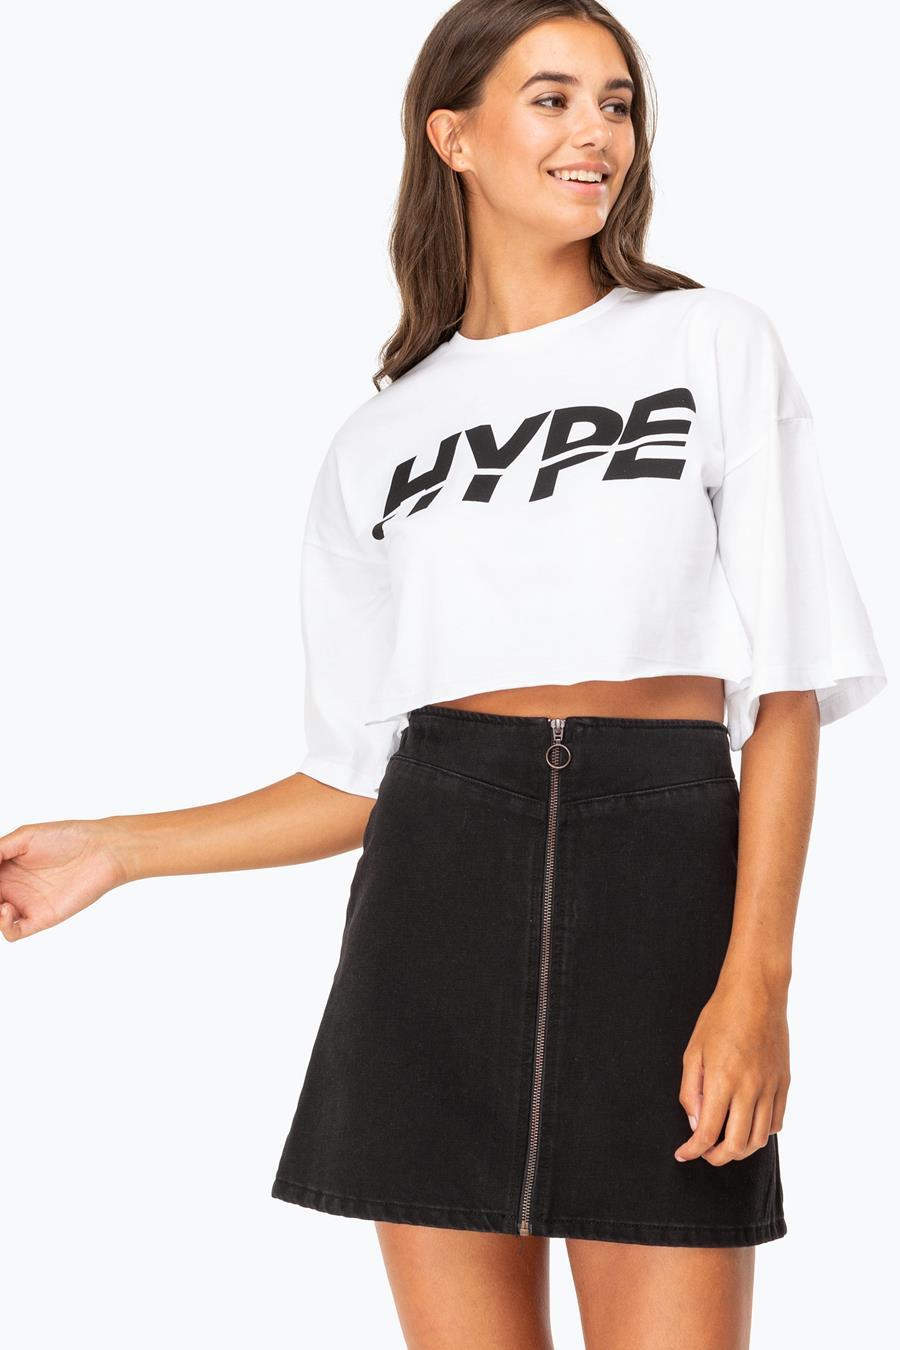 Hype White Sports Womens Oversized Crop Top | Size 14